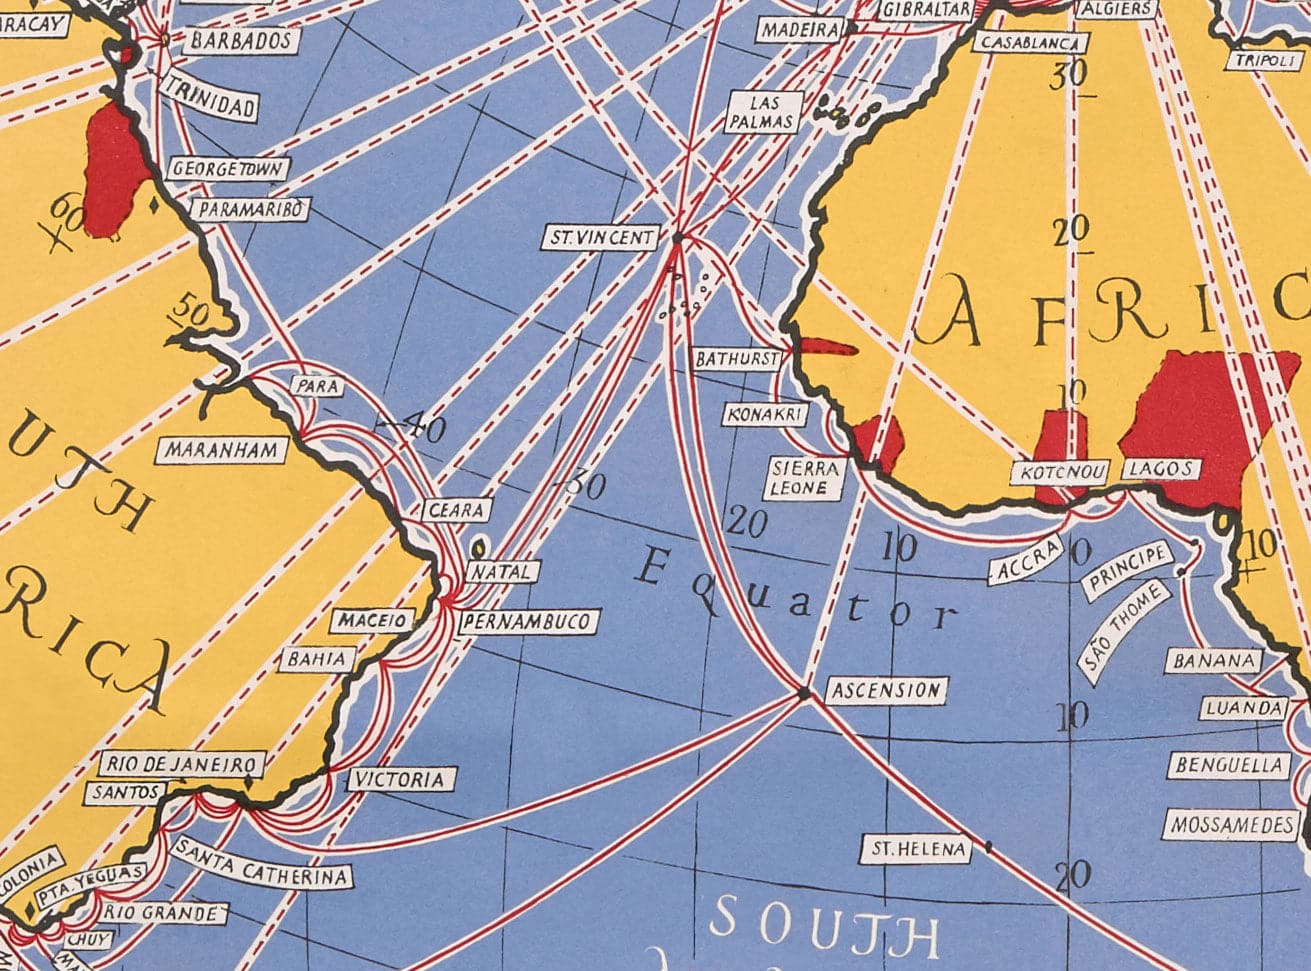 Old Cable & Wireless Great Circle Map, 1945 by Max Gill - Flat Earth British Empire Submarine Network Chart